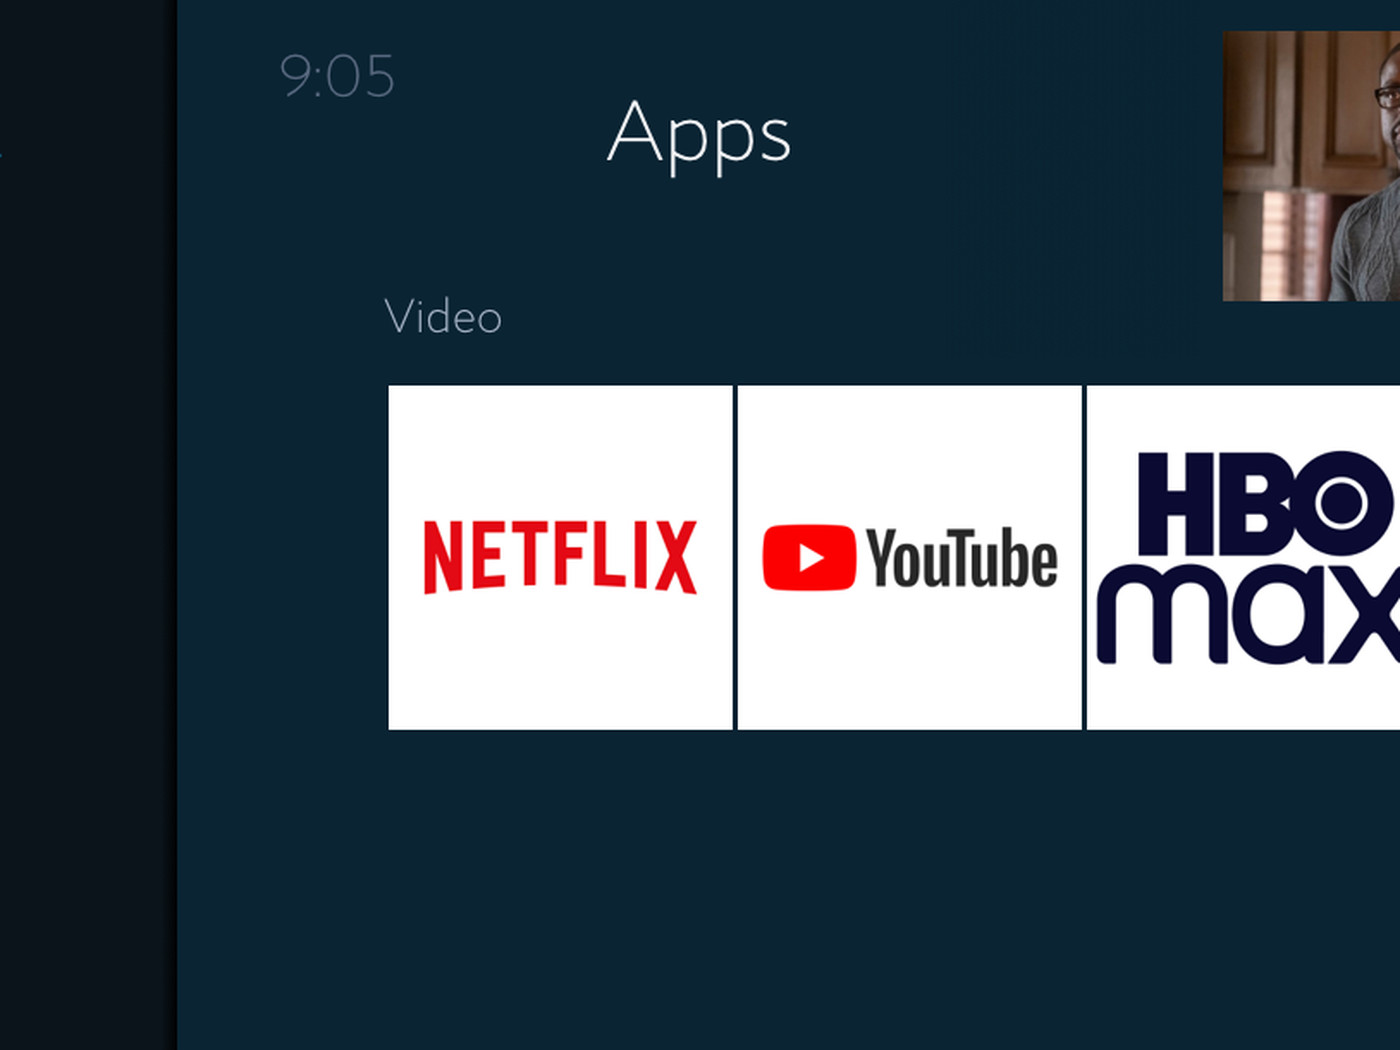 Hbo Max And Youtube Are Now On Spectrum Tv - The Verge